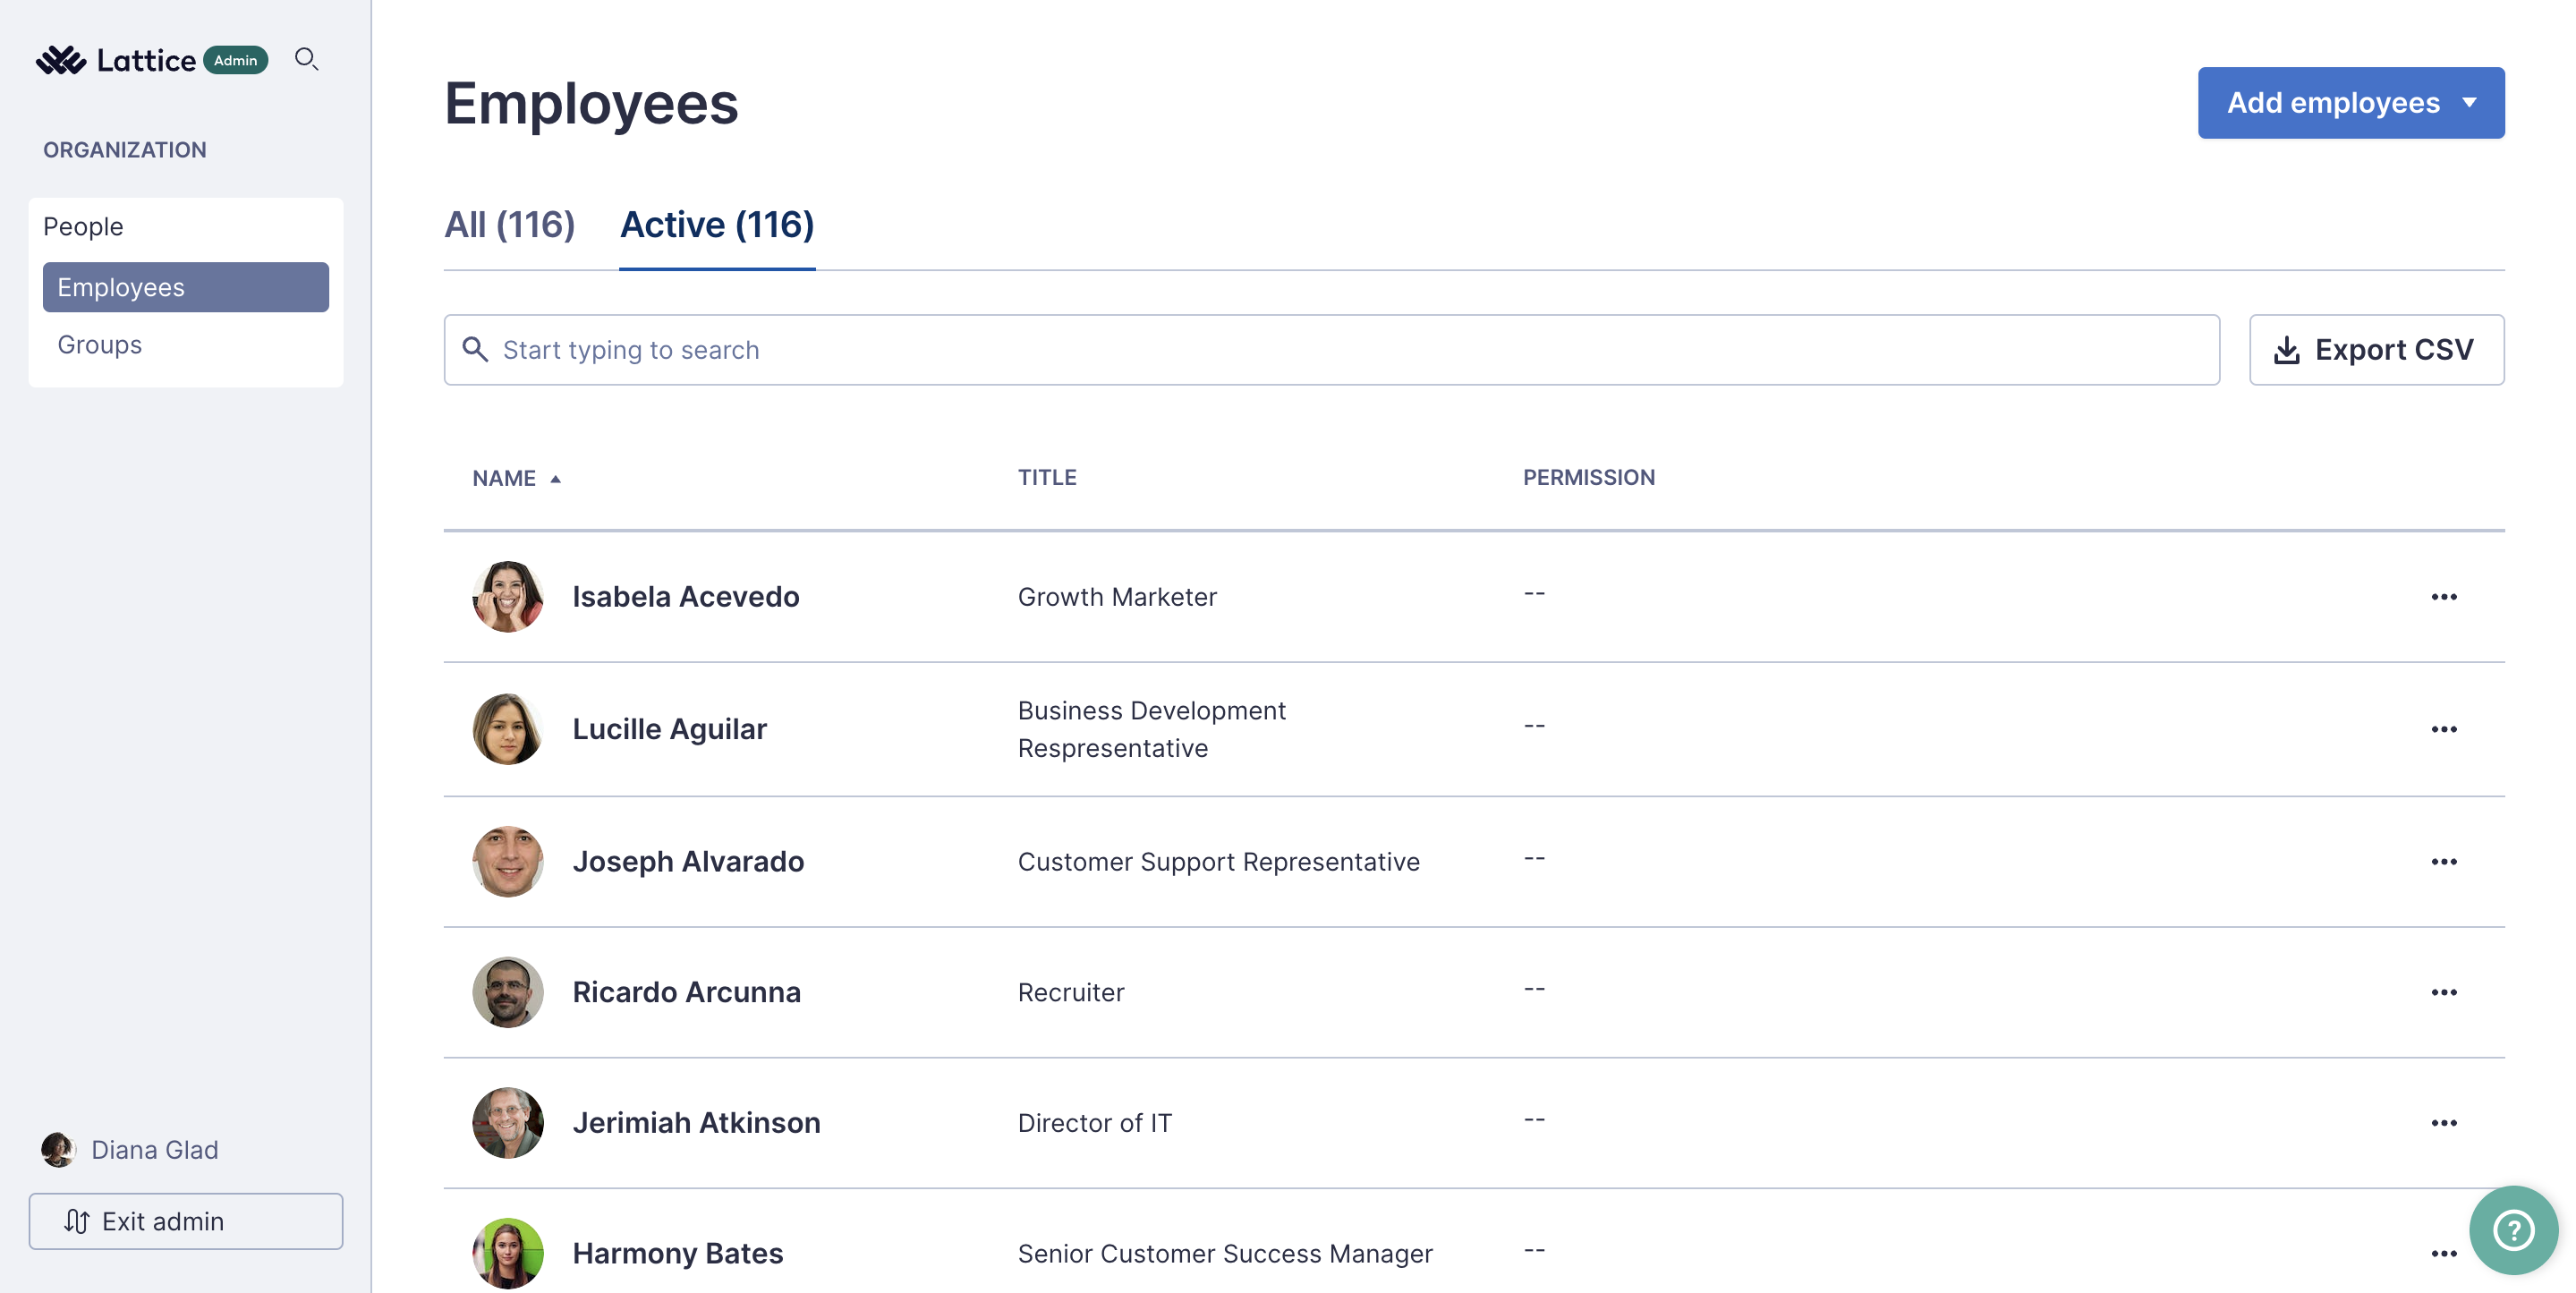 Custom role view for People permissions. The Admin page is open to the People Employee's page where a list of employees can be seen. The Admin left navigation bar includes the People section with two sub-pages: Employees and Groups.